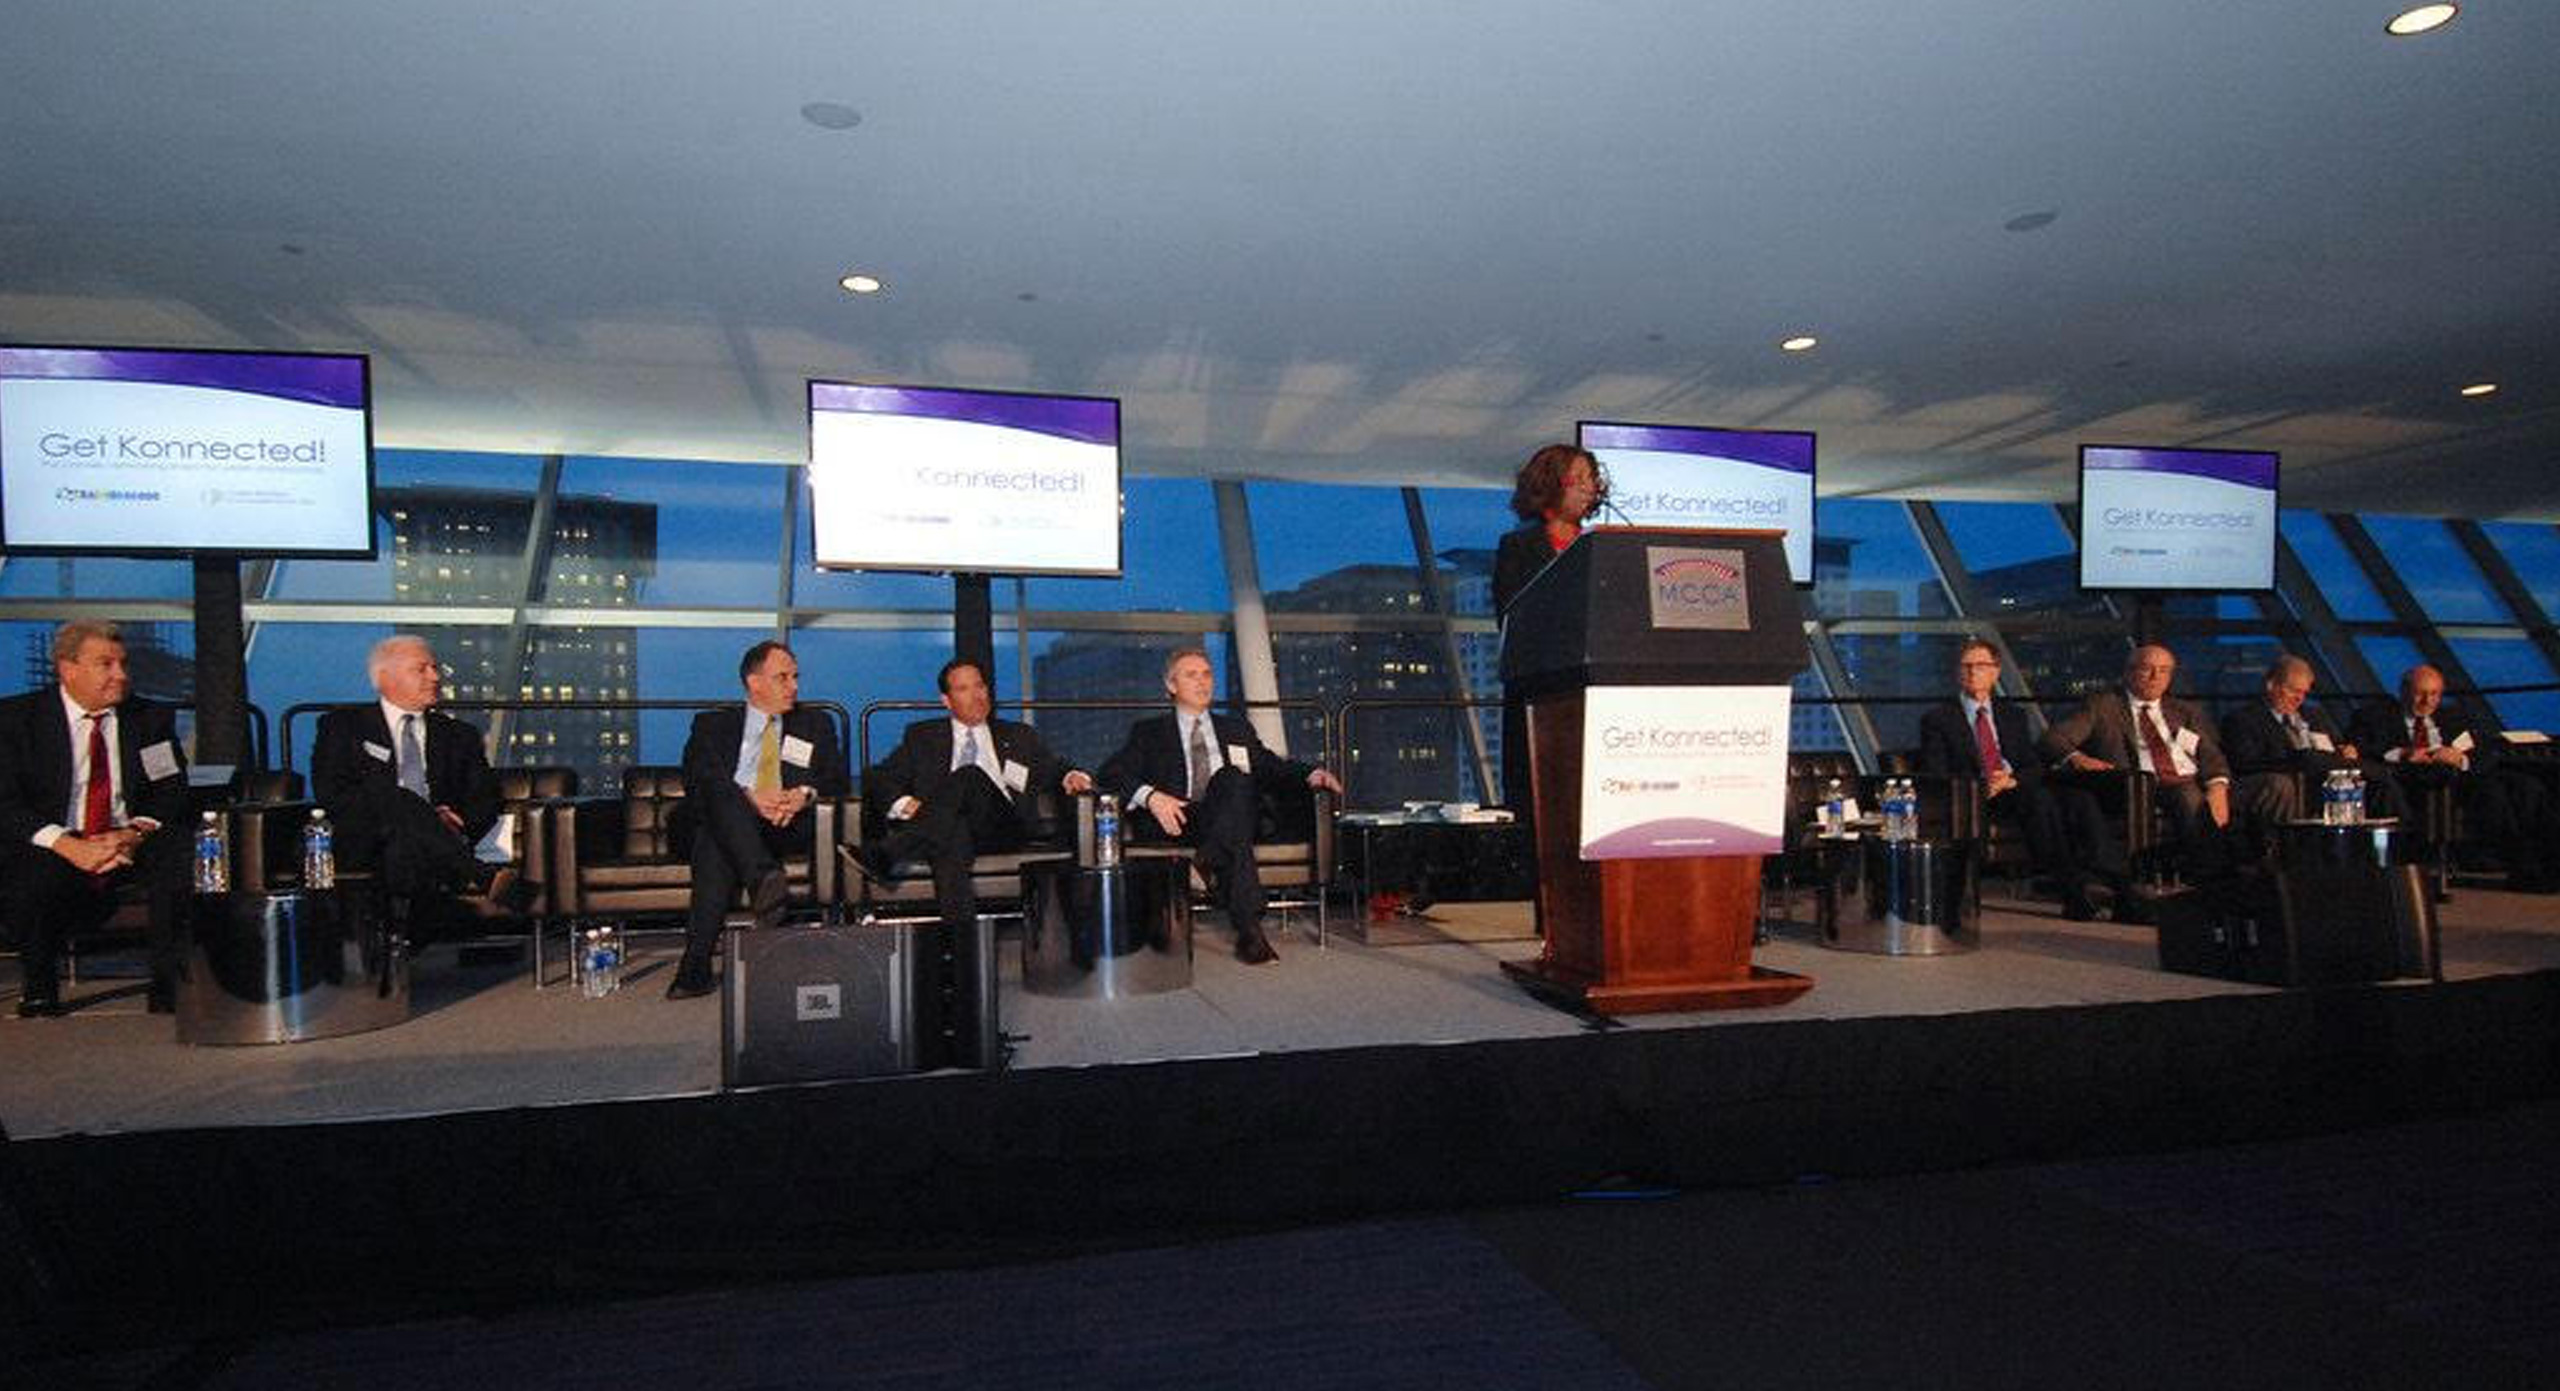 Collete Phillips standing in front of a panel discussing Get Konnected